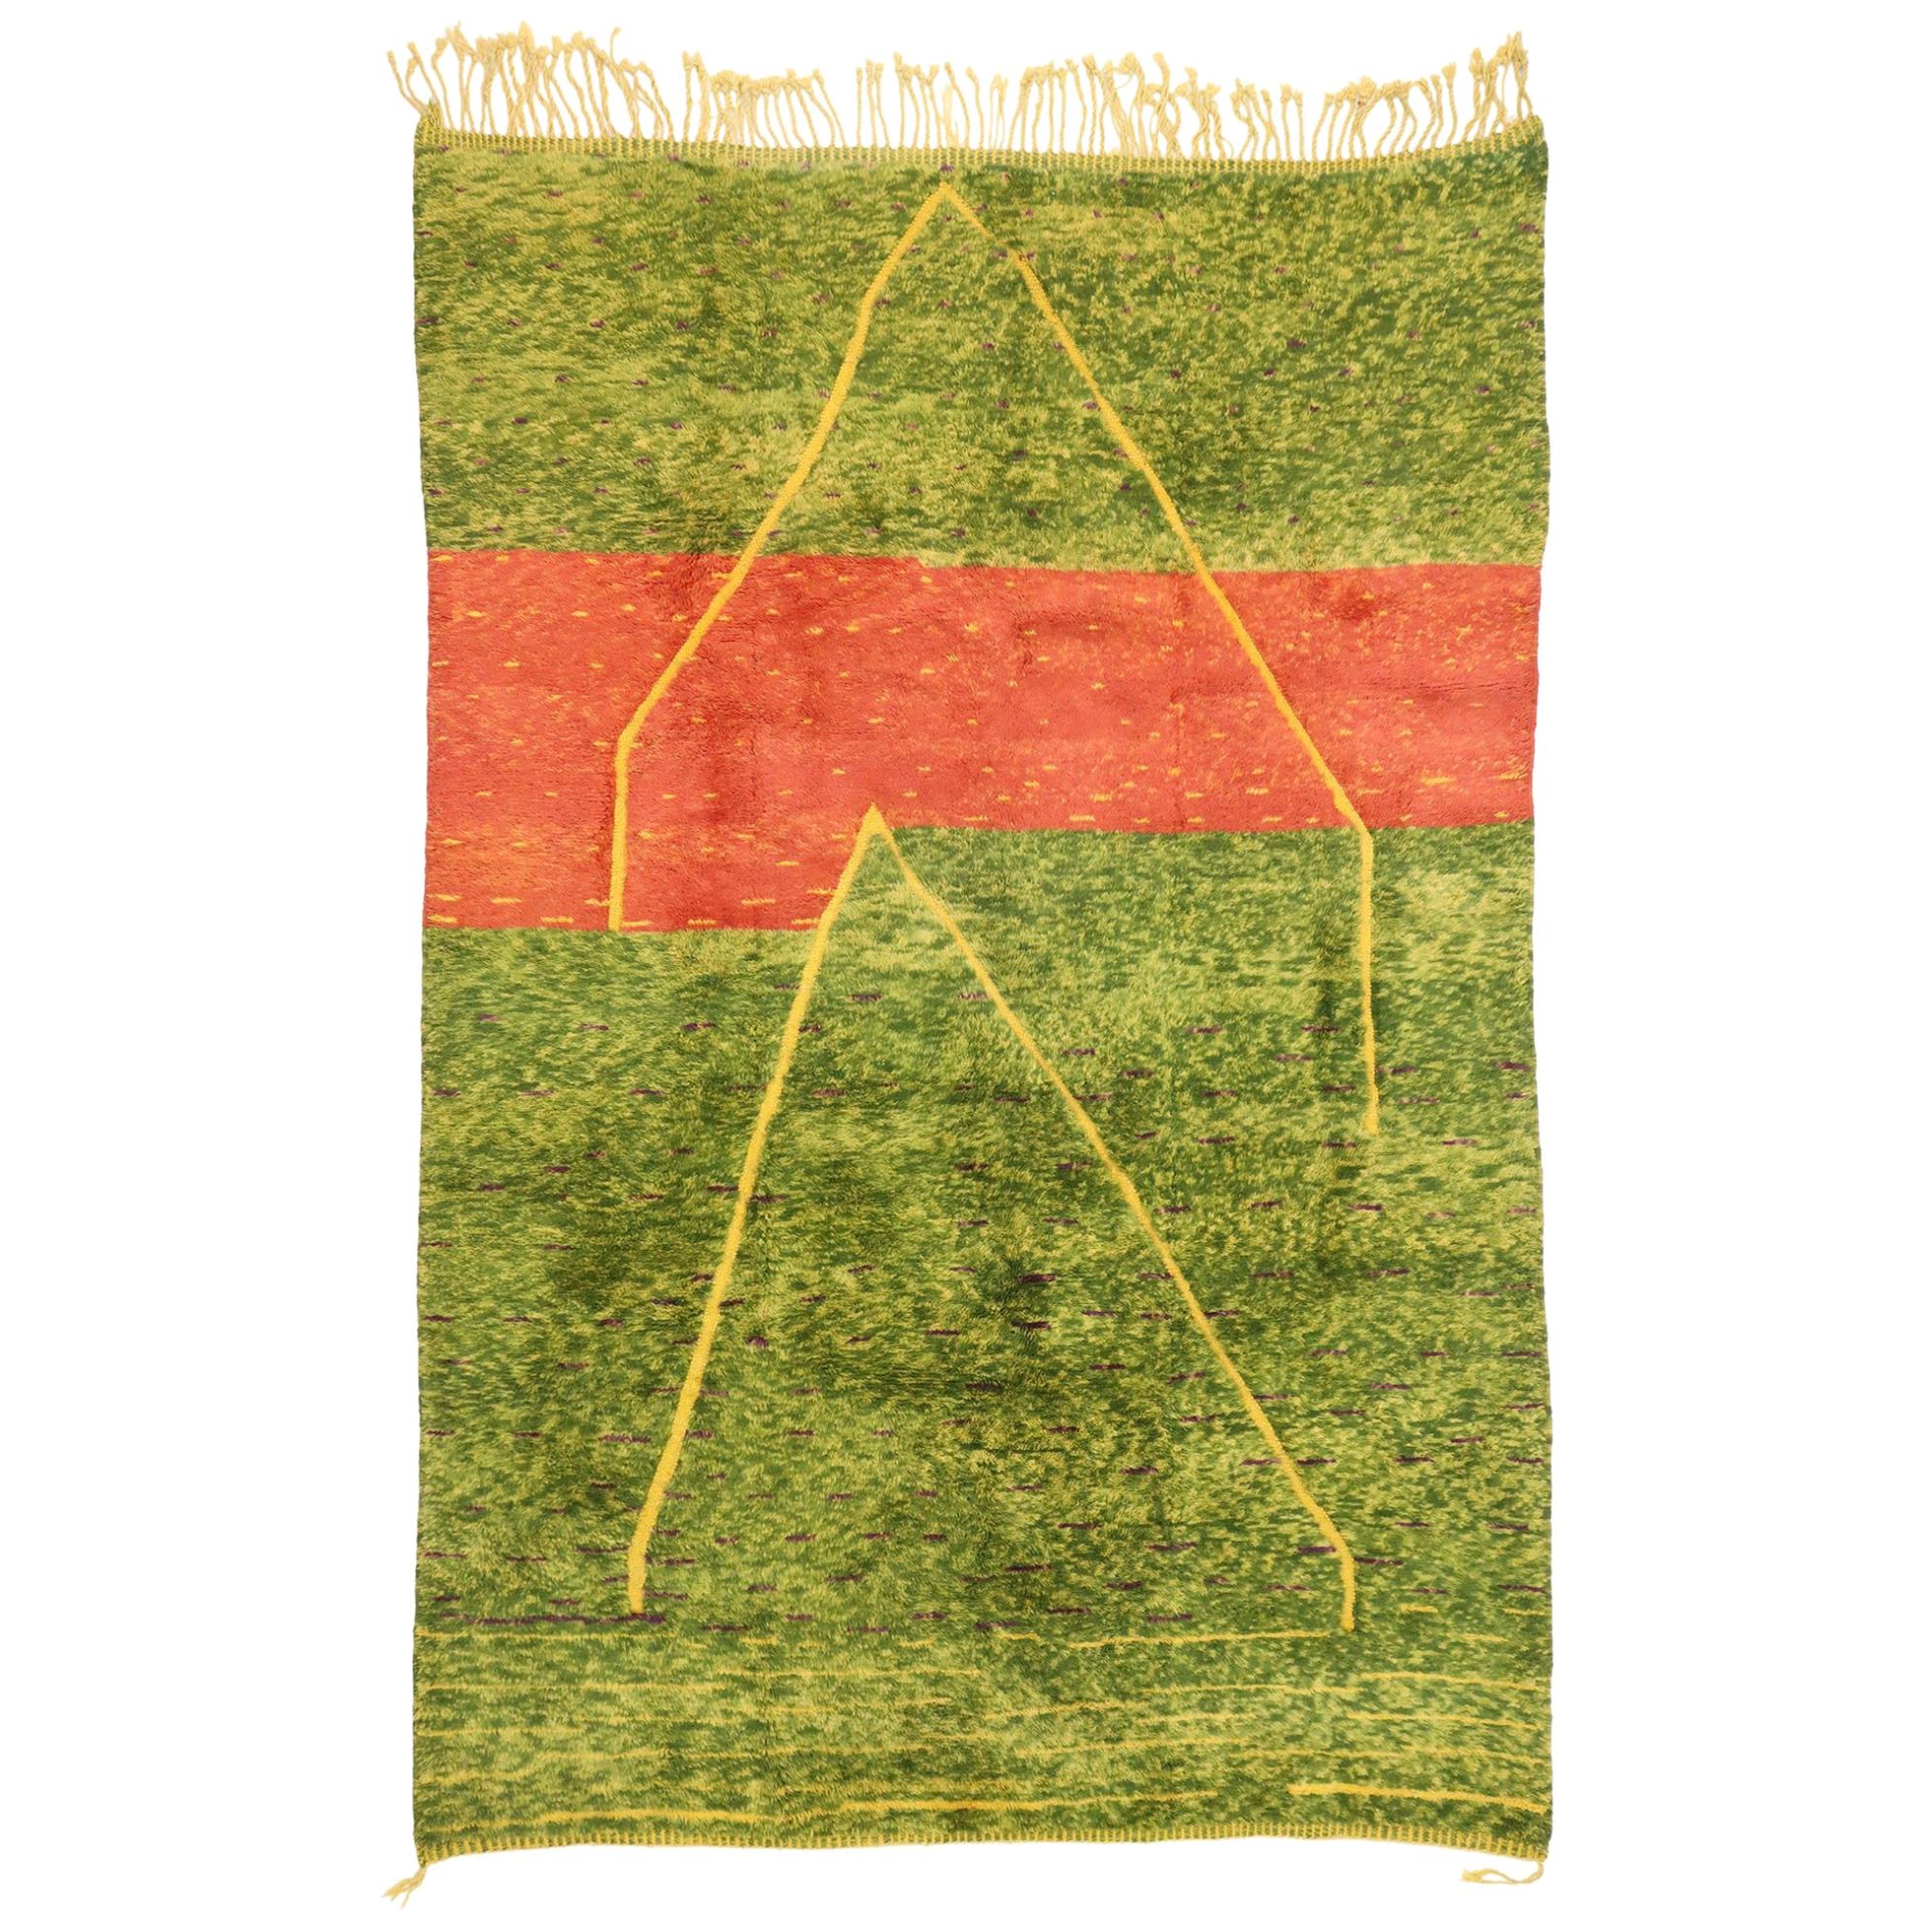 Green Beni Mrirt Moroccan Rug, Tribal Enchantment Meets Abstract Expressionism For Sale